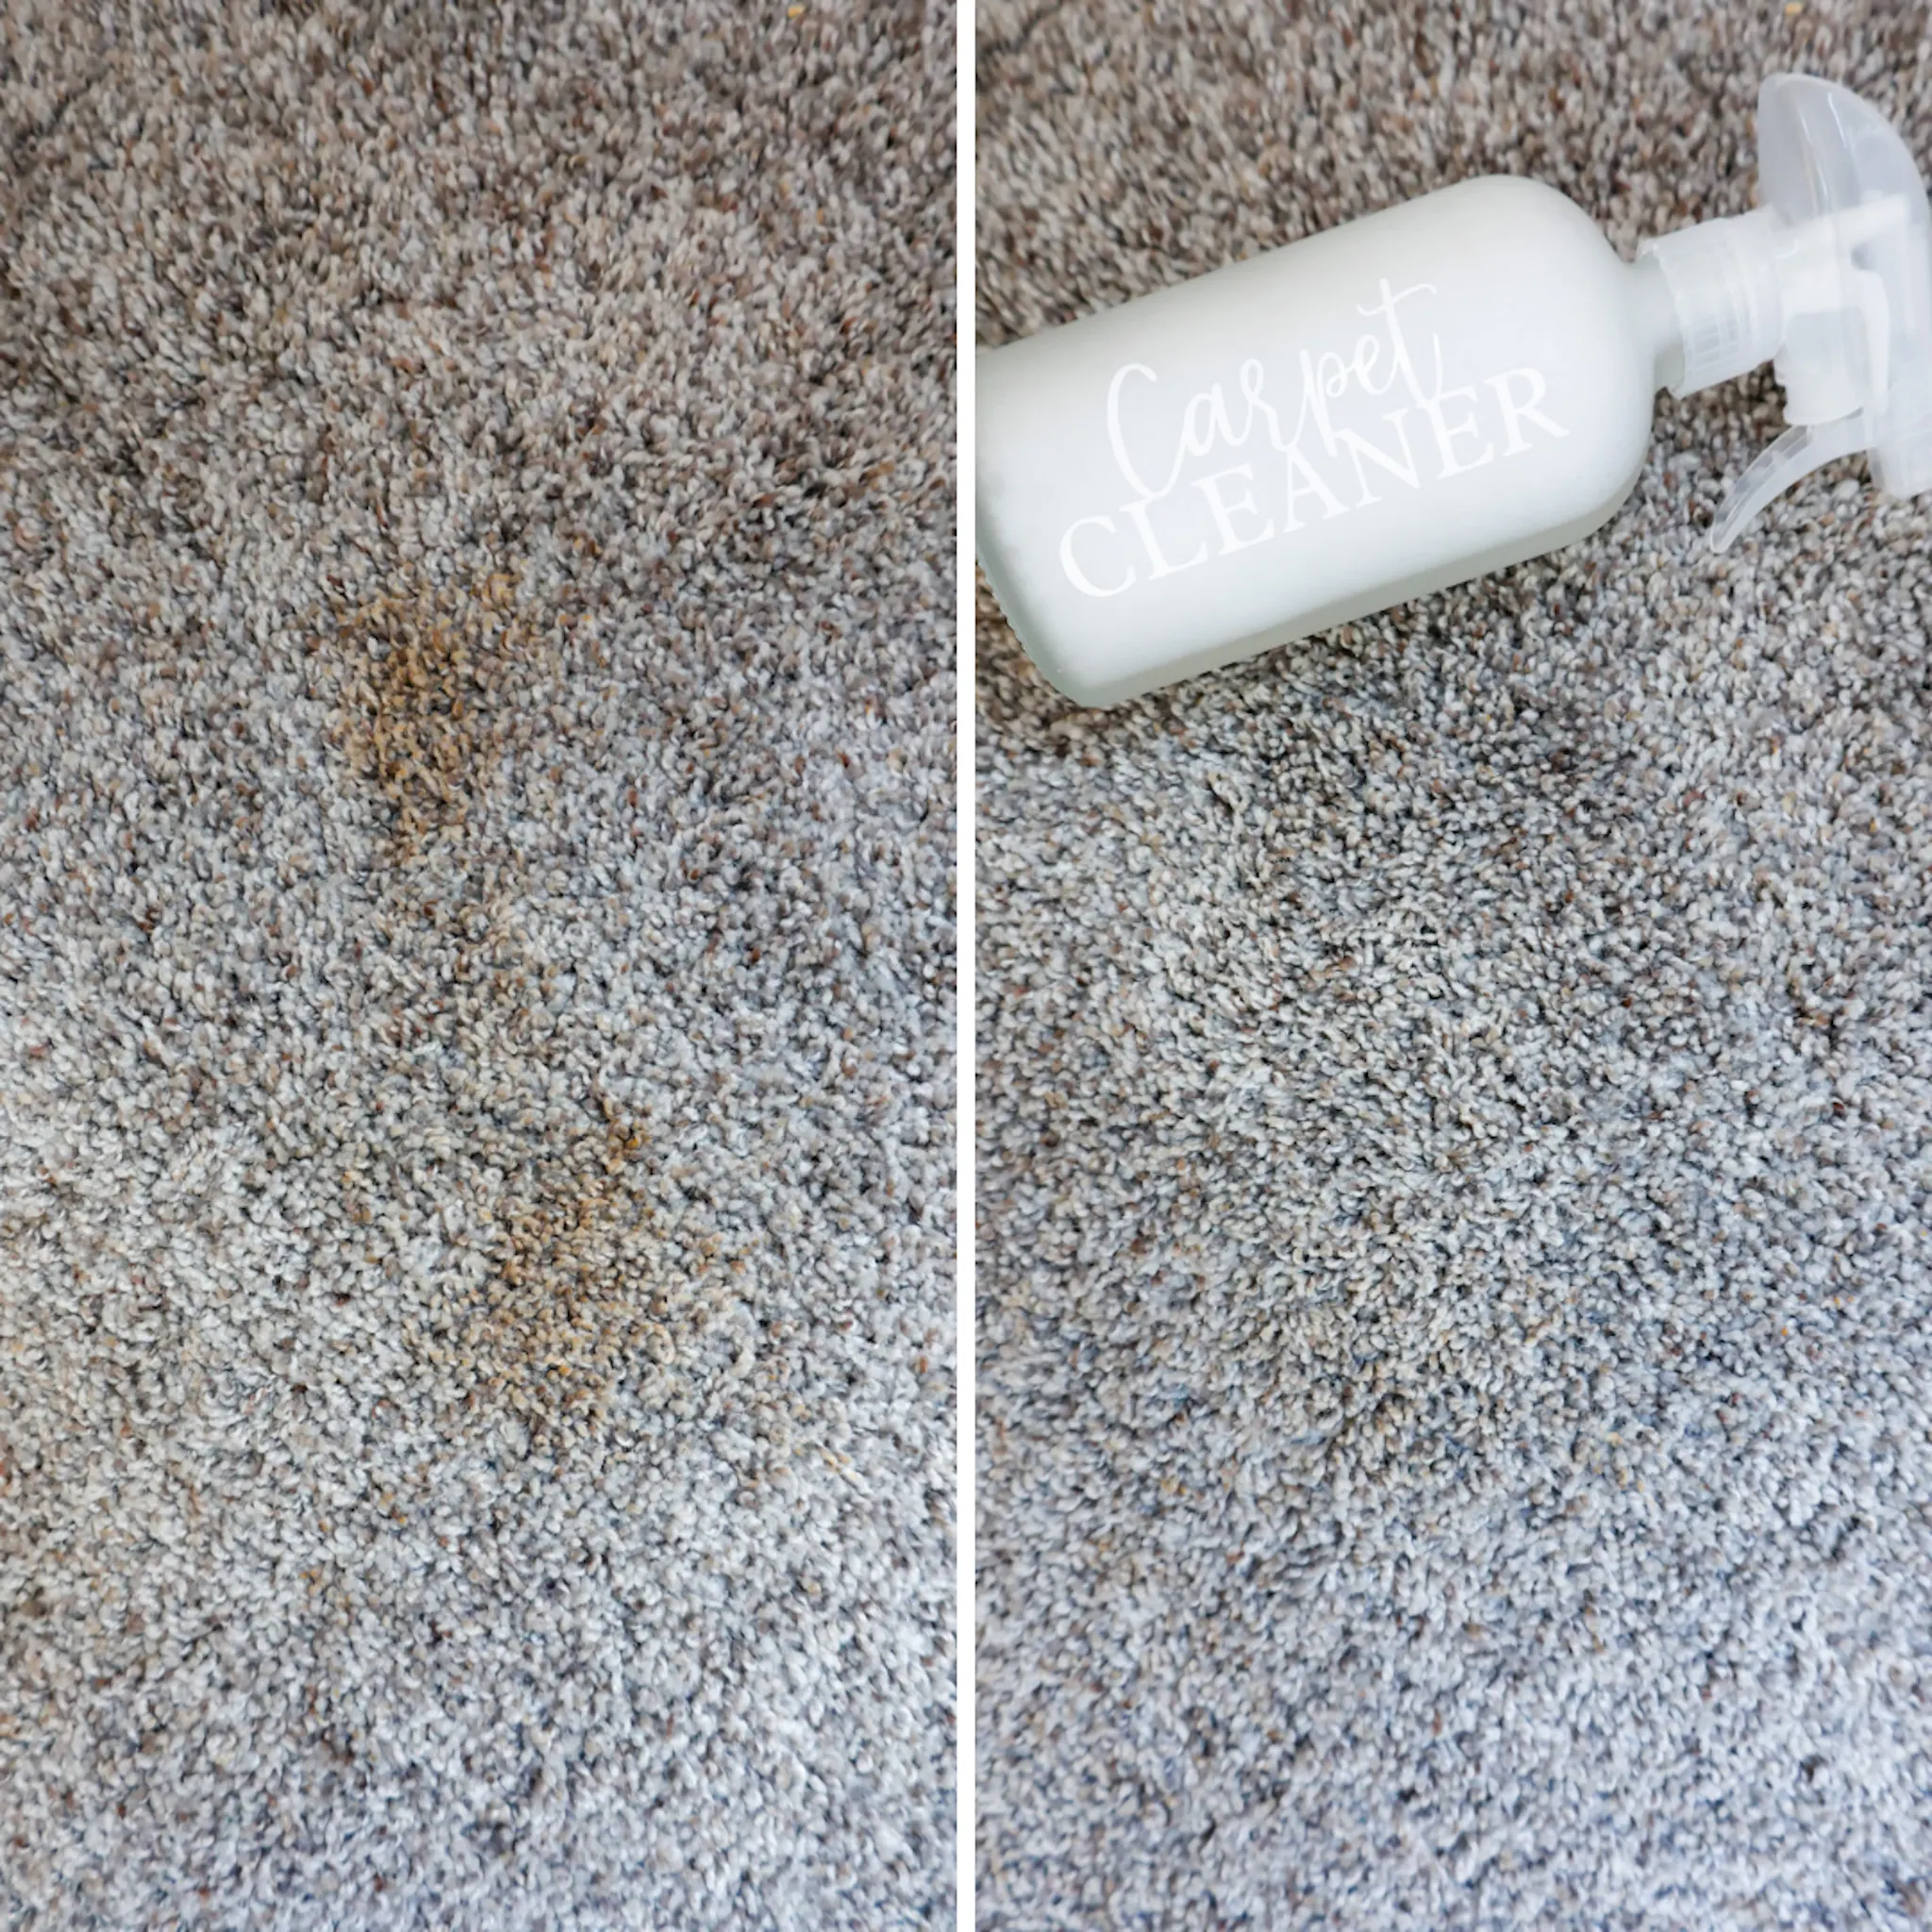 homemade carpet cleaner solution before and after